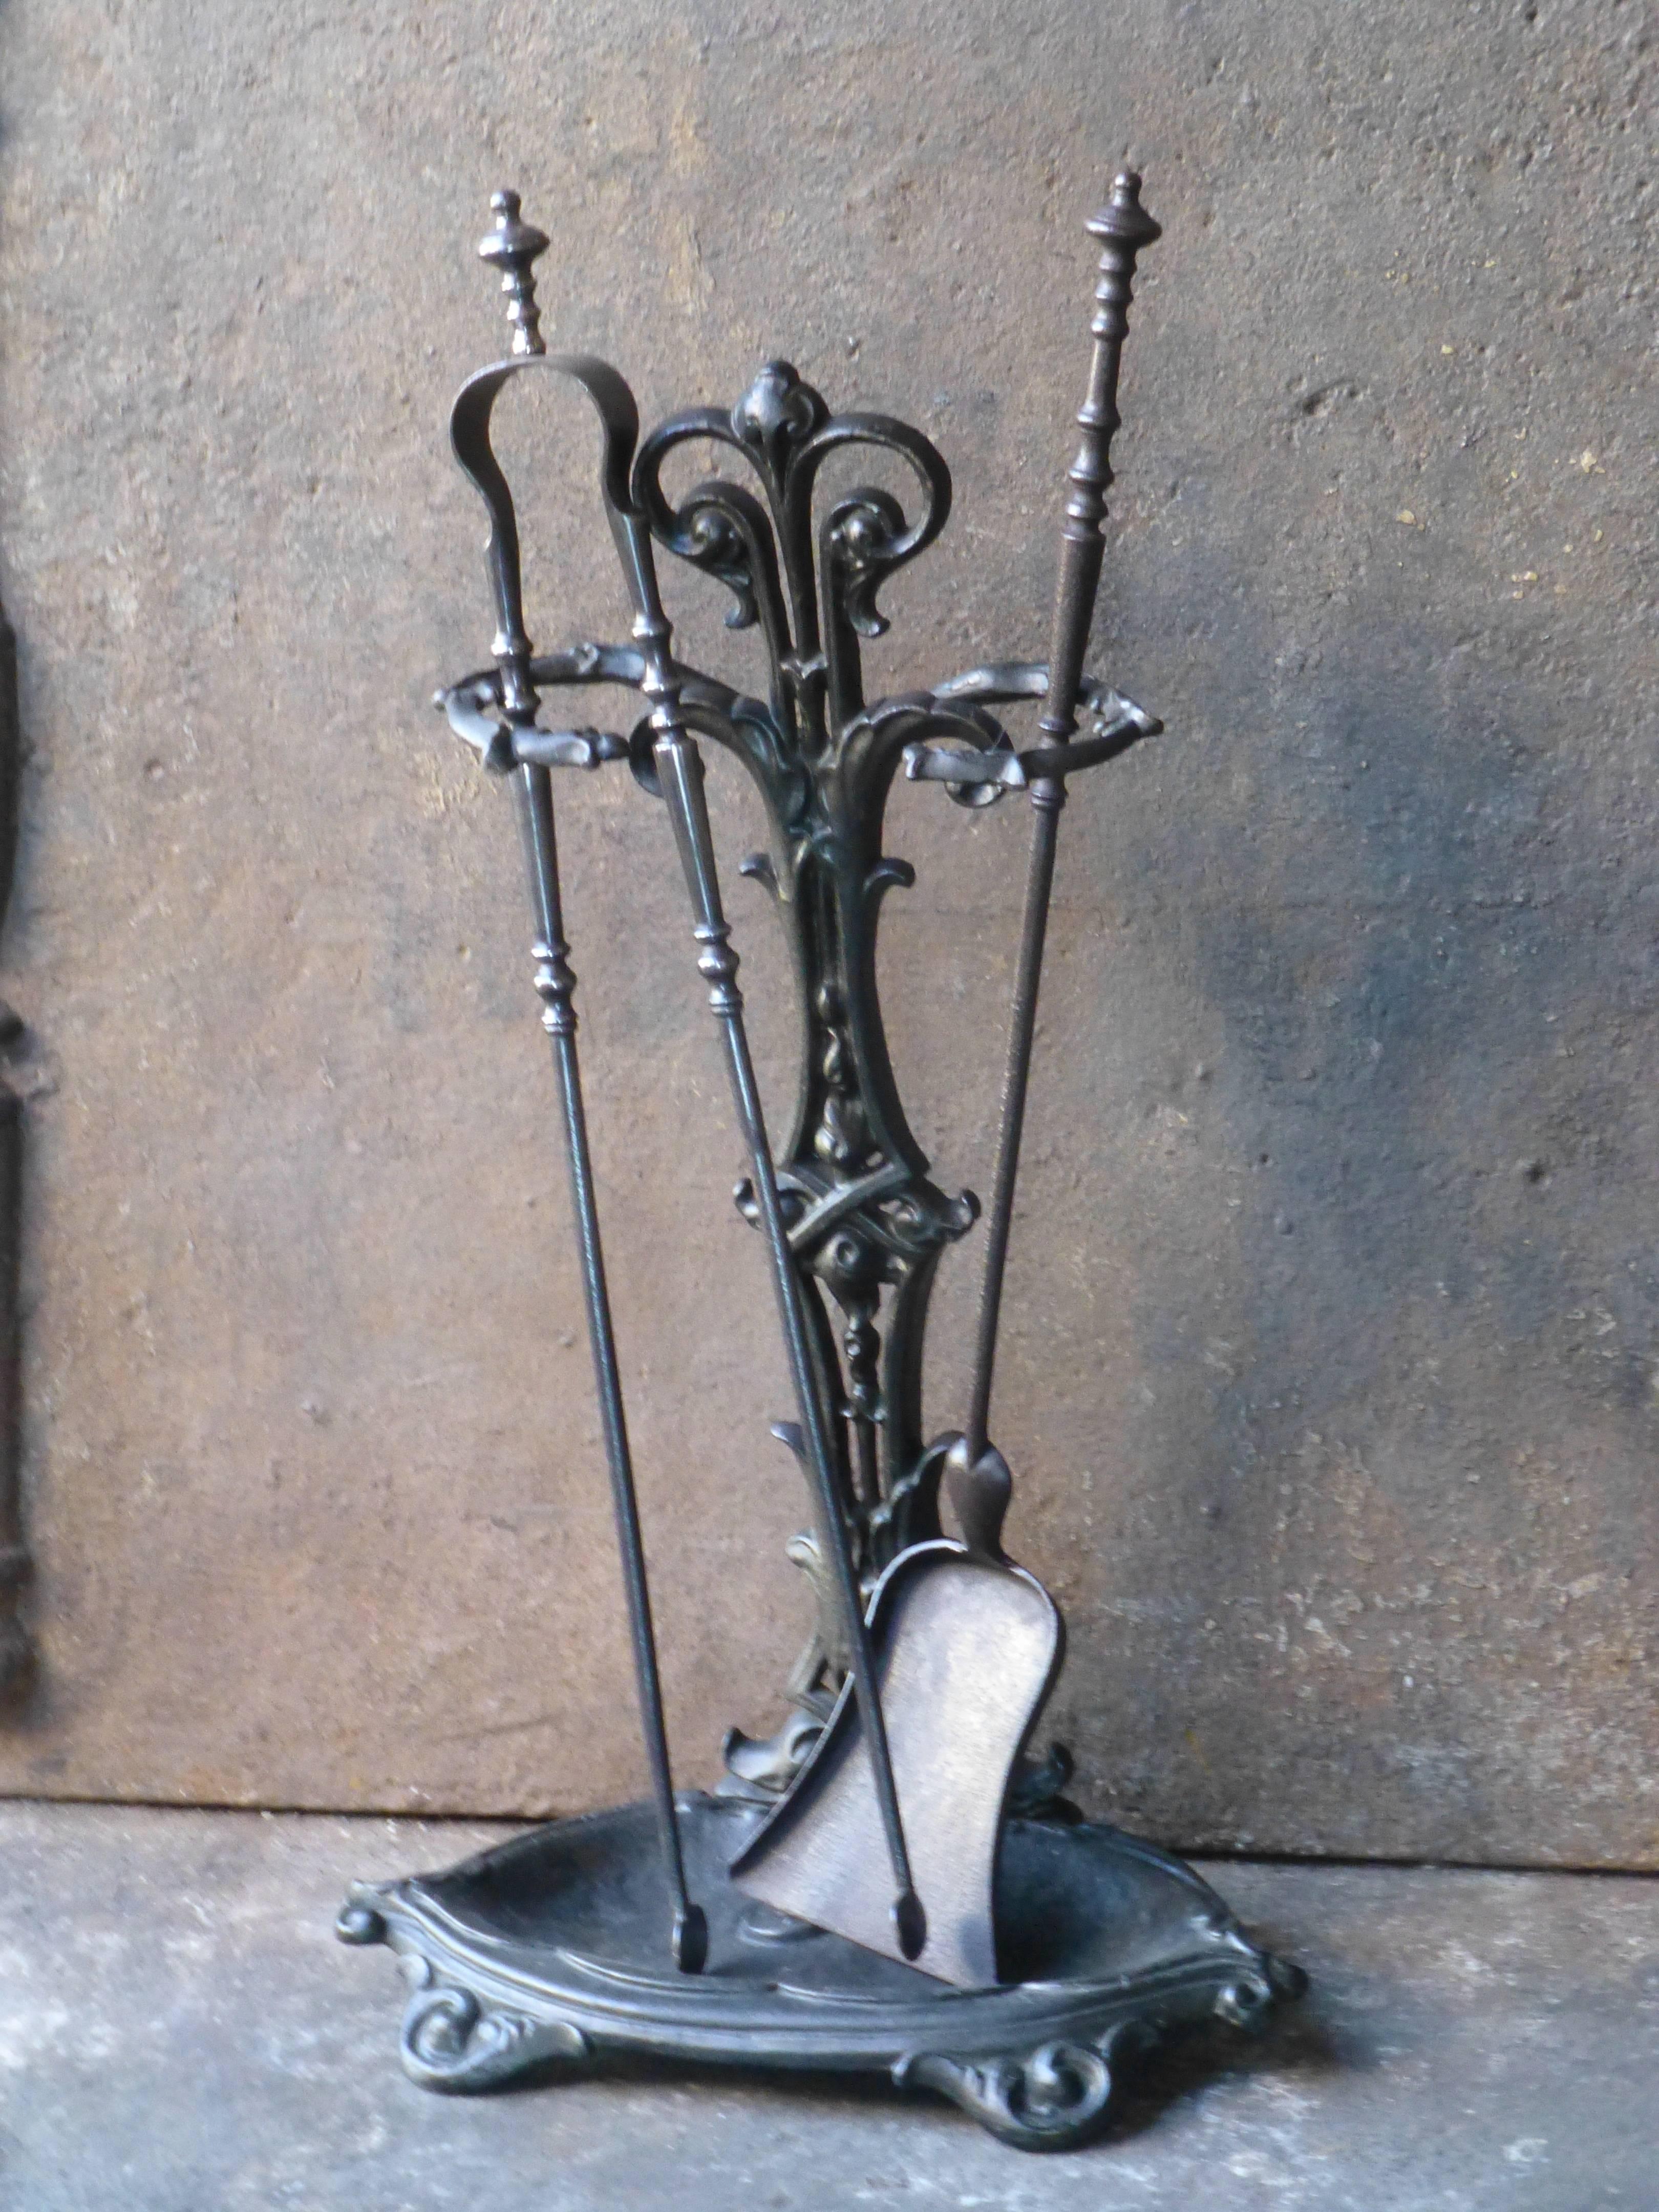 19th century French fireplace tool set.

We have a unique and specialized collection of antique and used fireplace accessories consisting of more than 1000 listings at 1stdibs. Amongst others we always have 300+ firebacks, 250+ pairs of andirons and